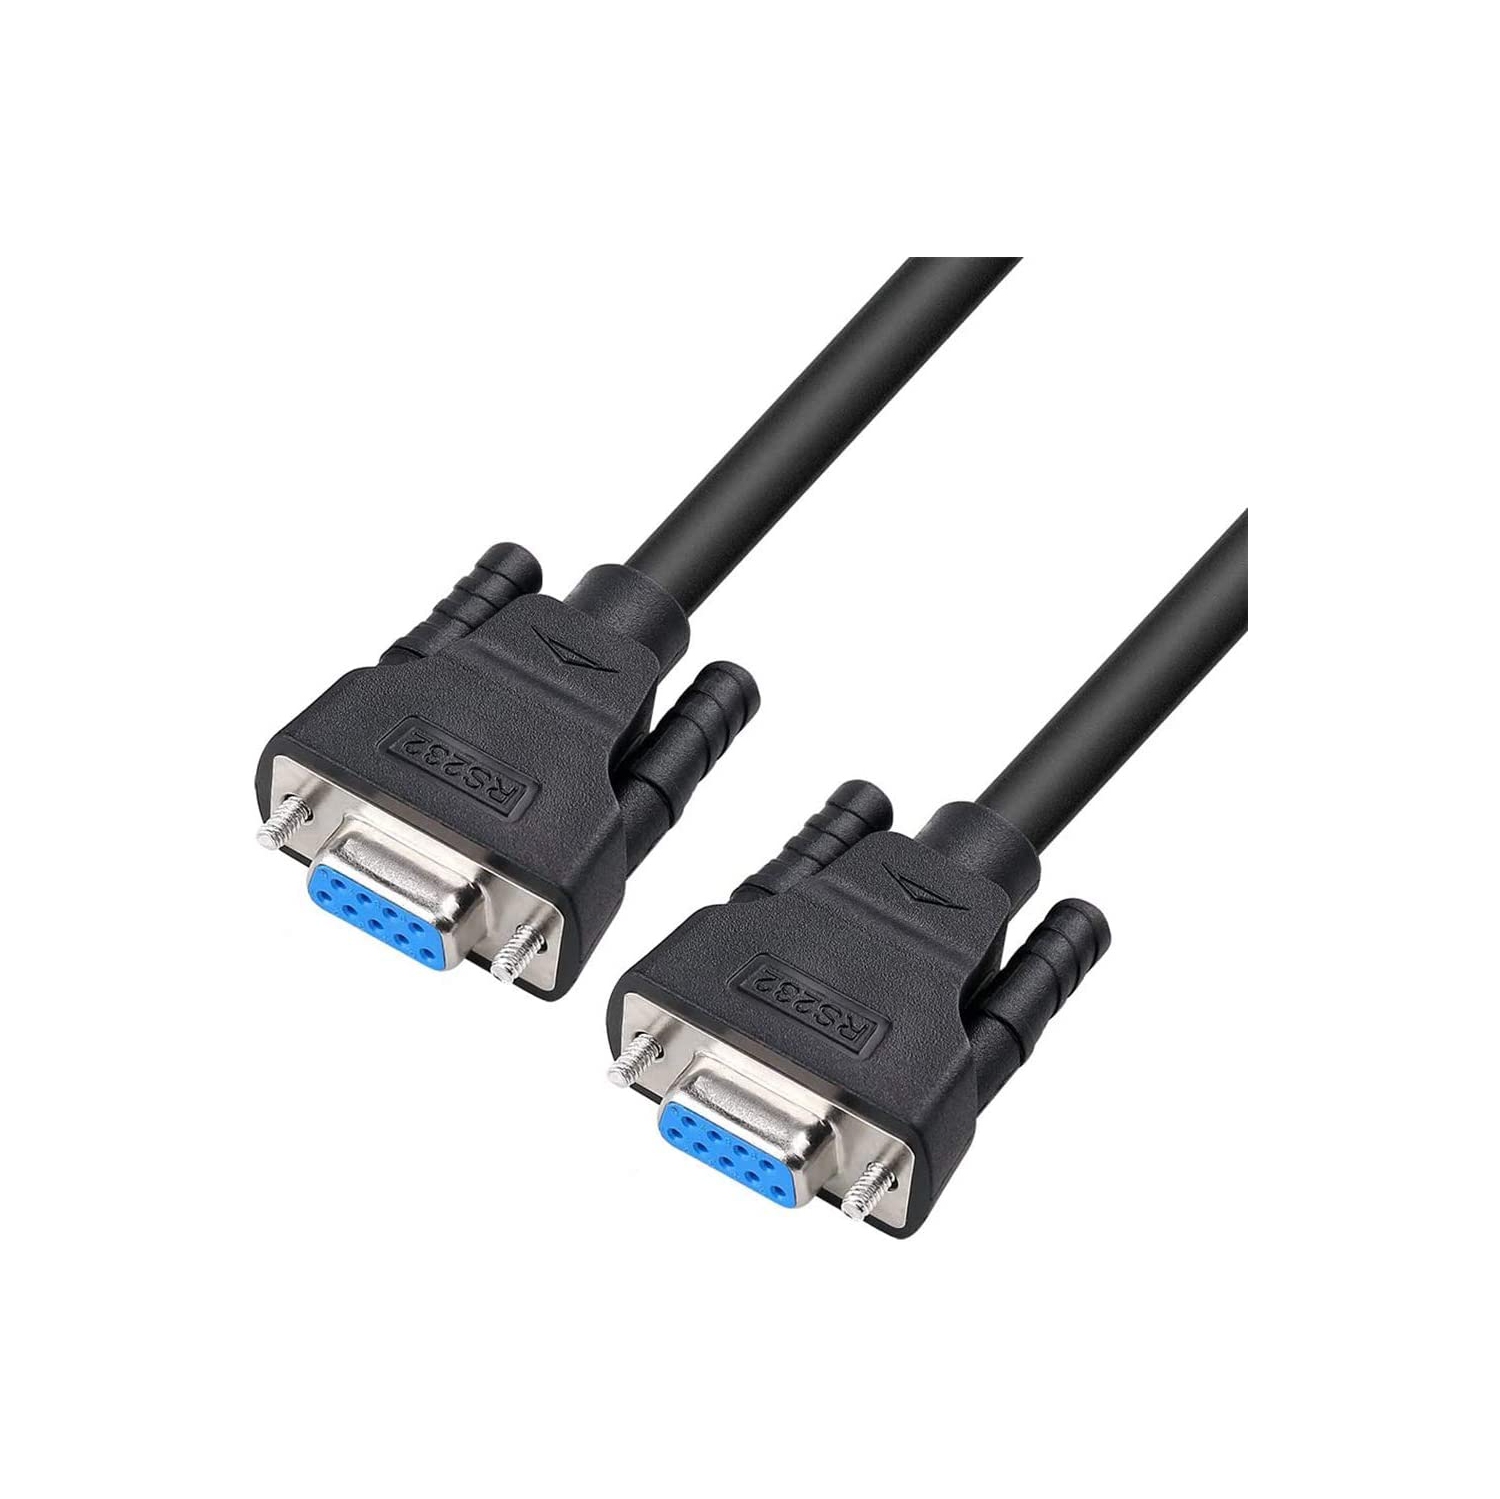 6 Feet DB9 to DB9 RS232 Serial Cable Female to Female Extension Null Modem Cord Simple TX RX Crossover Cable for Data Communication